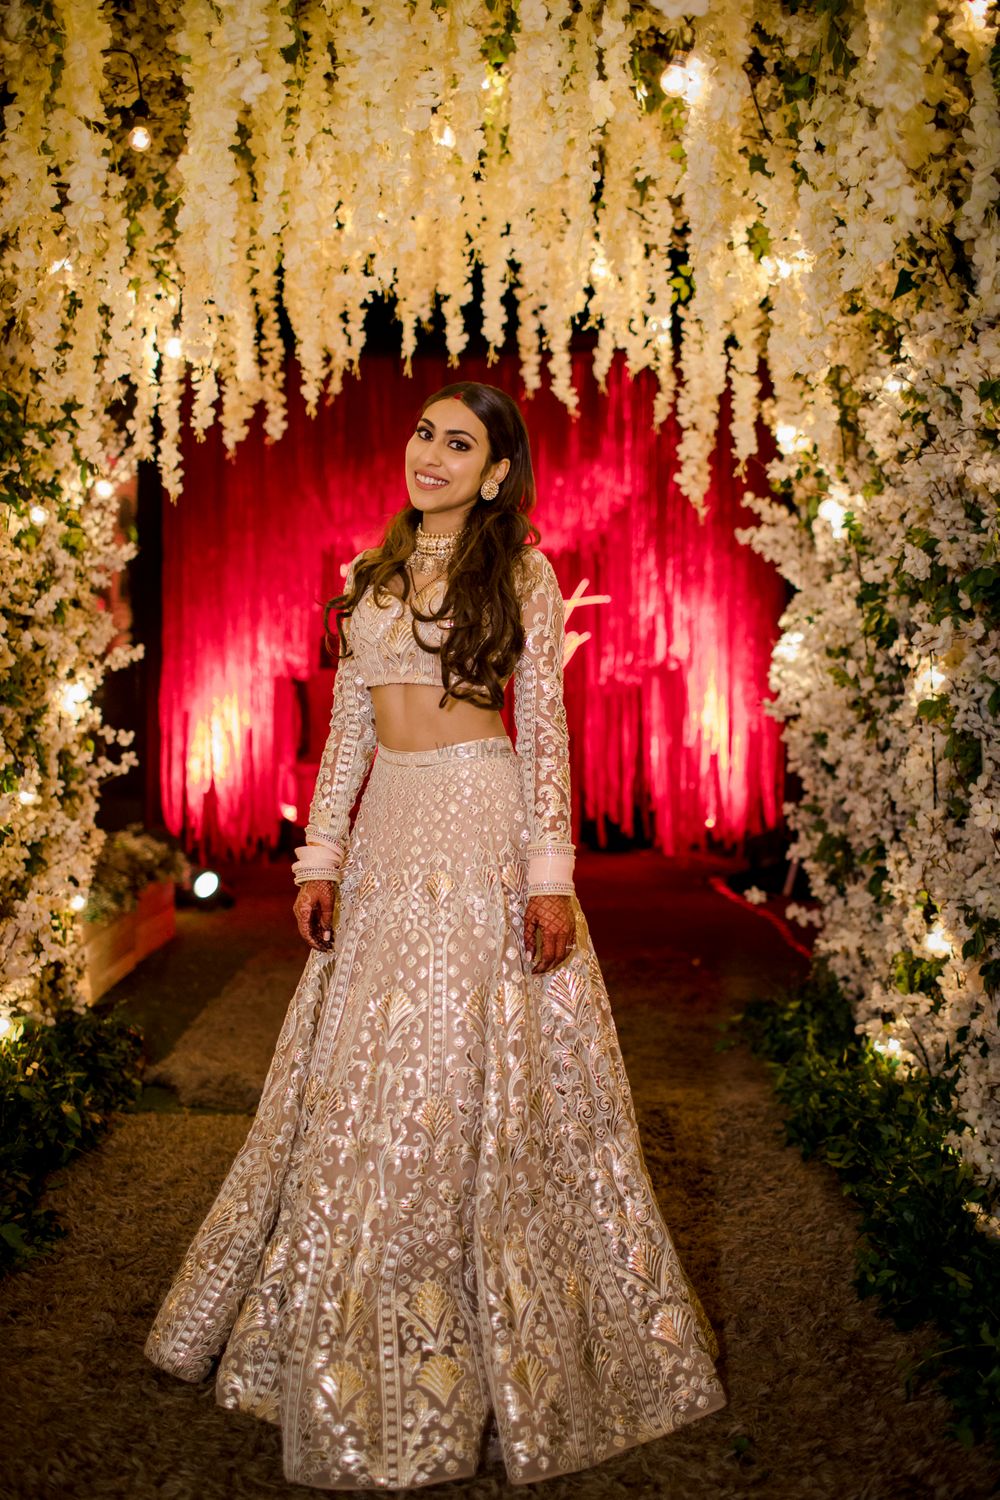 Photo of Bride dressed in an ivory & silver lehenga for the reception.